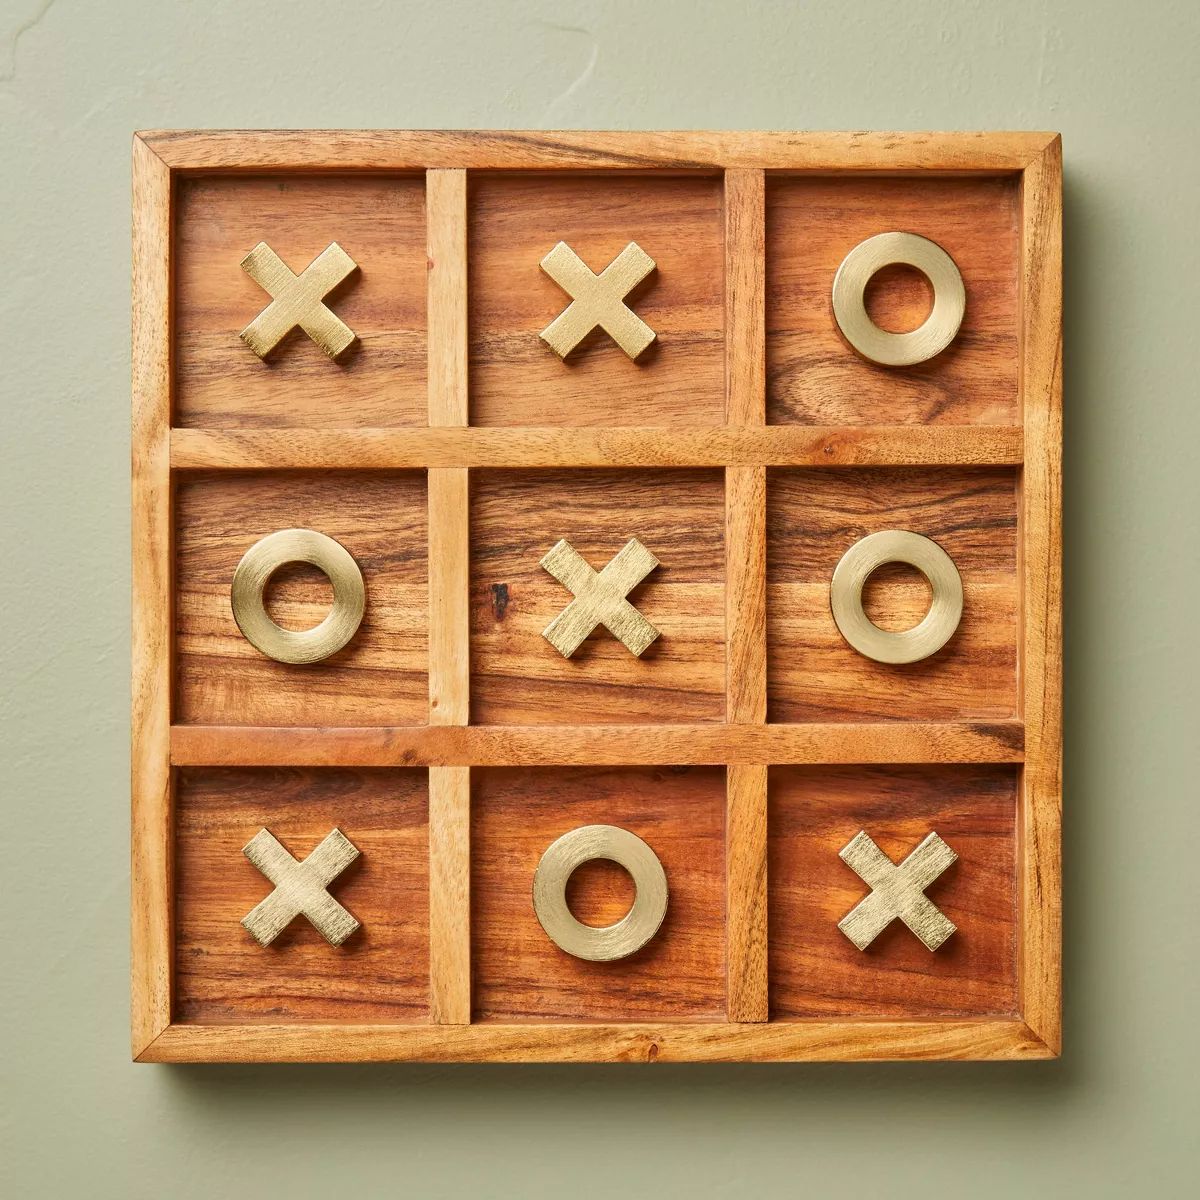 Brass and Wood Tic-Tac-Toe Game - 12pc - Hearth & Hand™ with Magnolia | Target